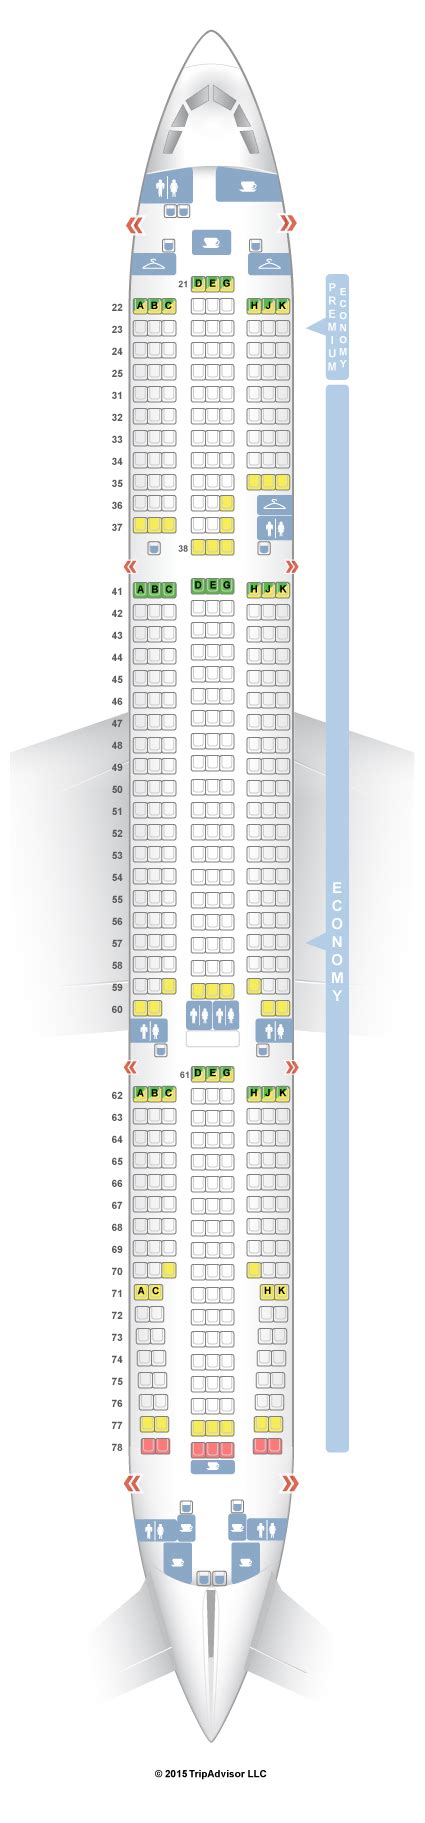 Airbus A332 Seating Chart Philippine Airlines Elcho Table